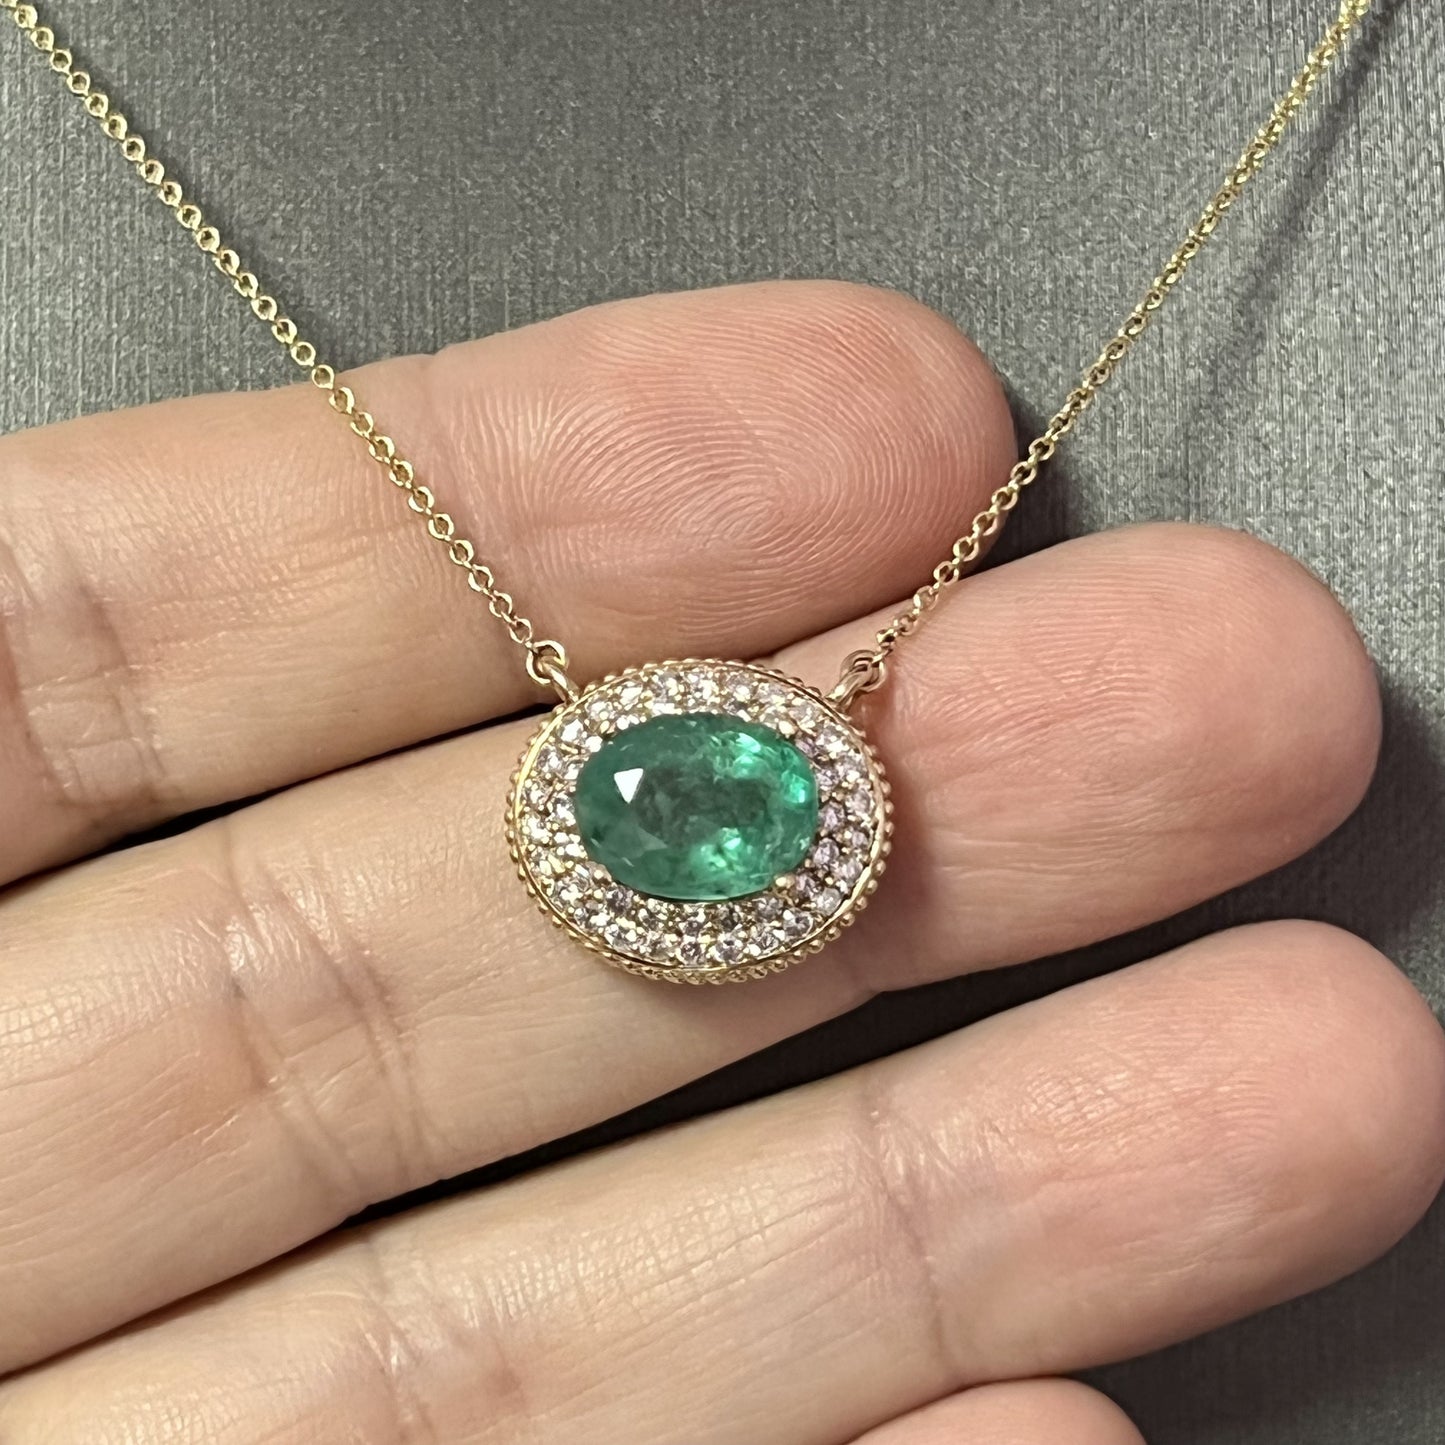 Natural Emerald Diamond Necklace 18" 14k Gold 6.29 TCW Certified $6,950 213253